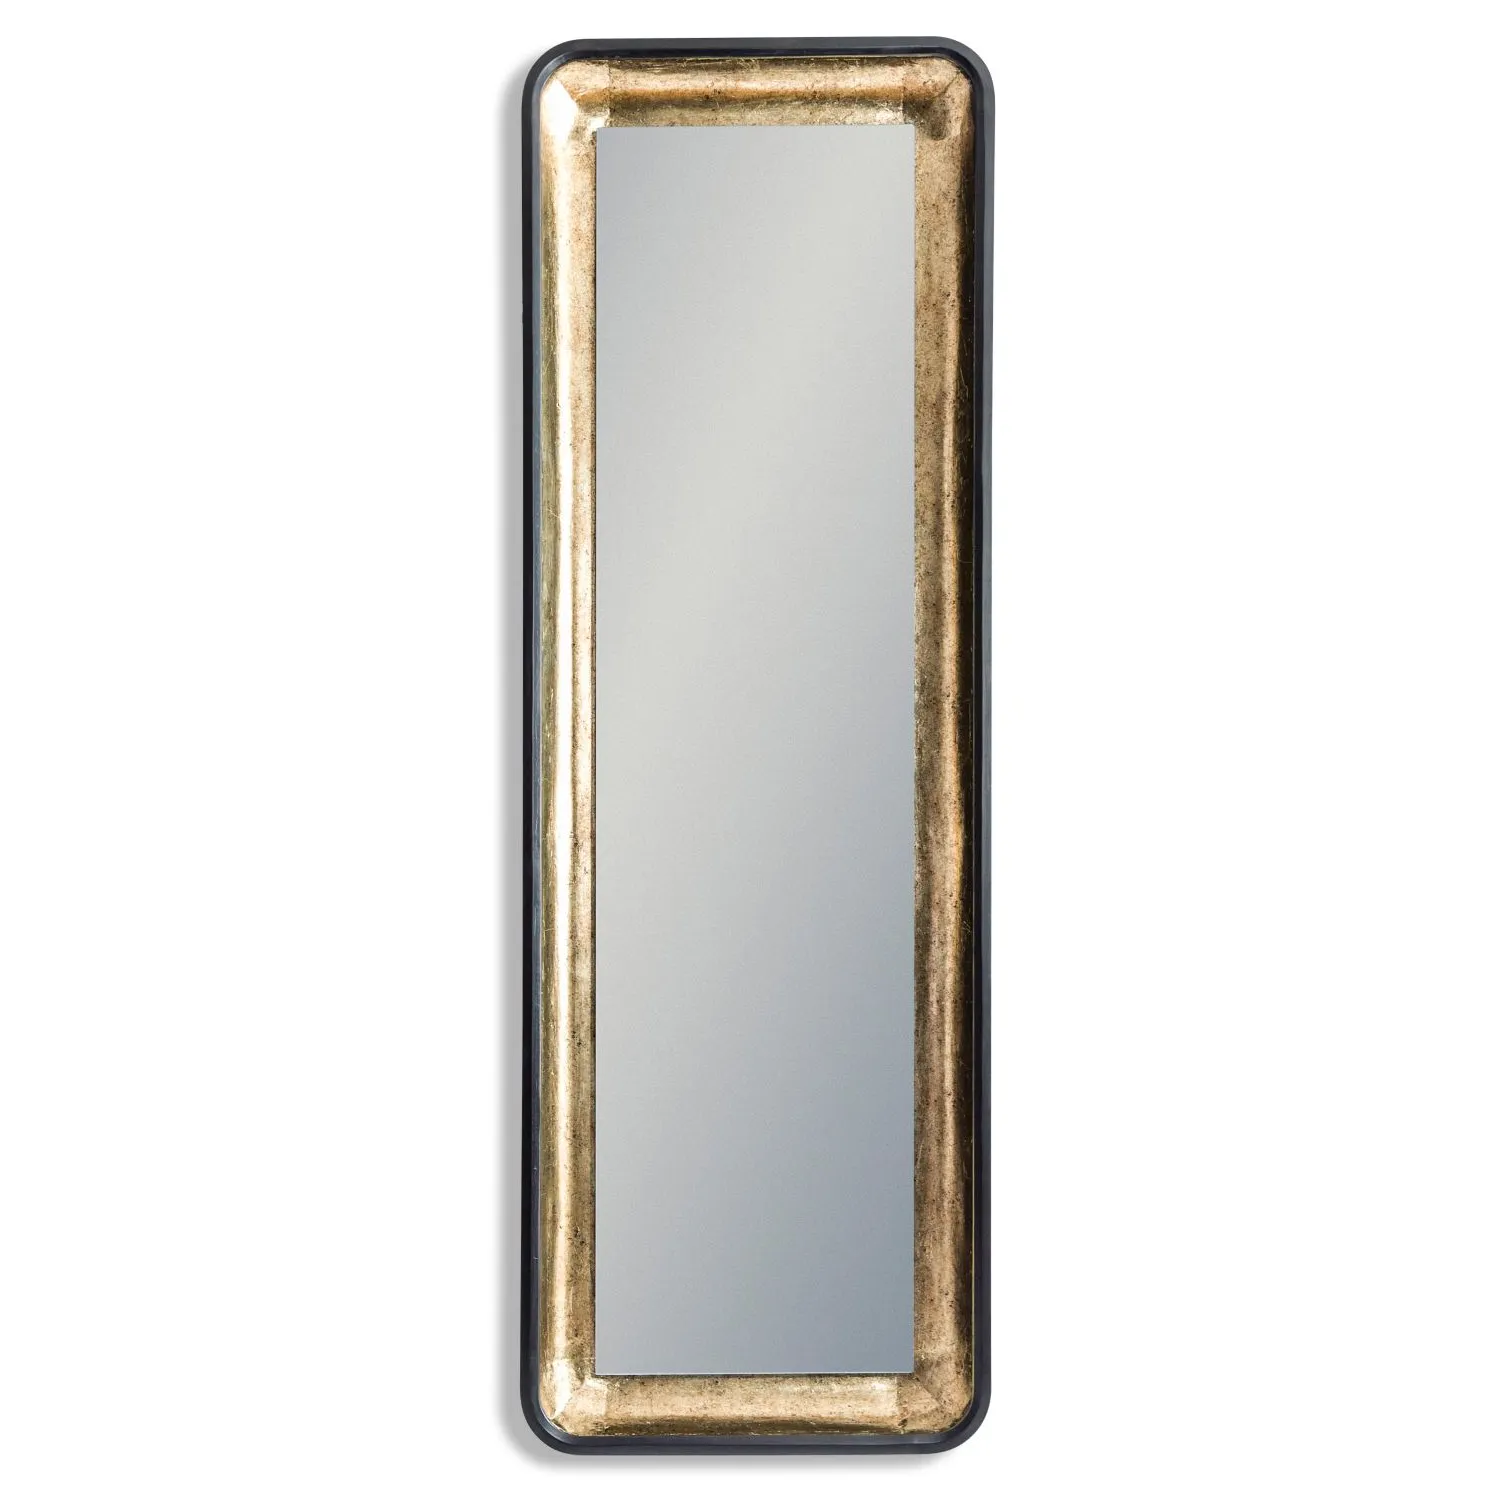 Black And Antique Gold Tall Wall Mirror with Led Lighting